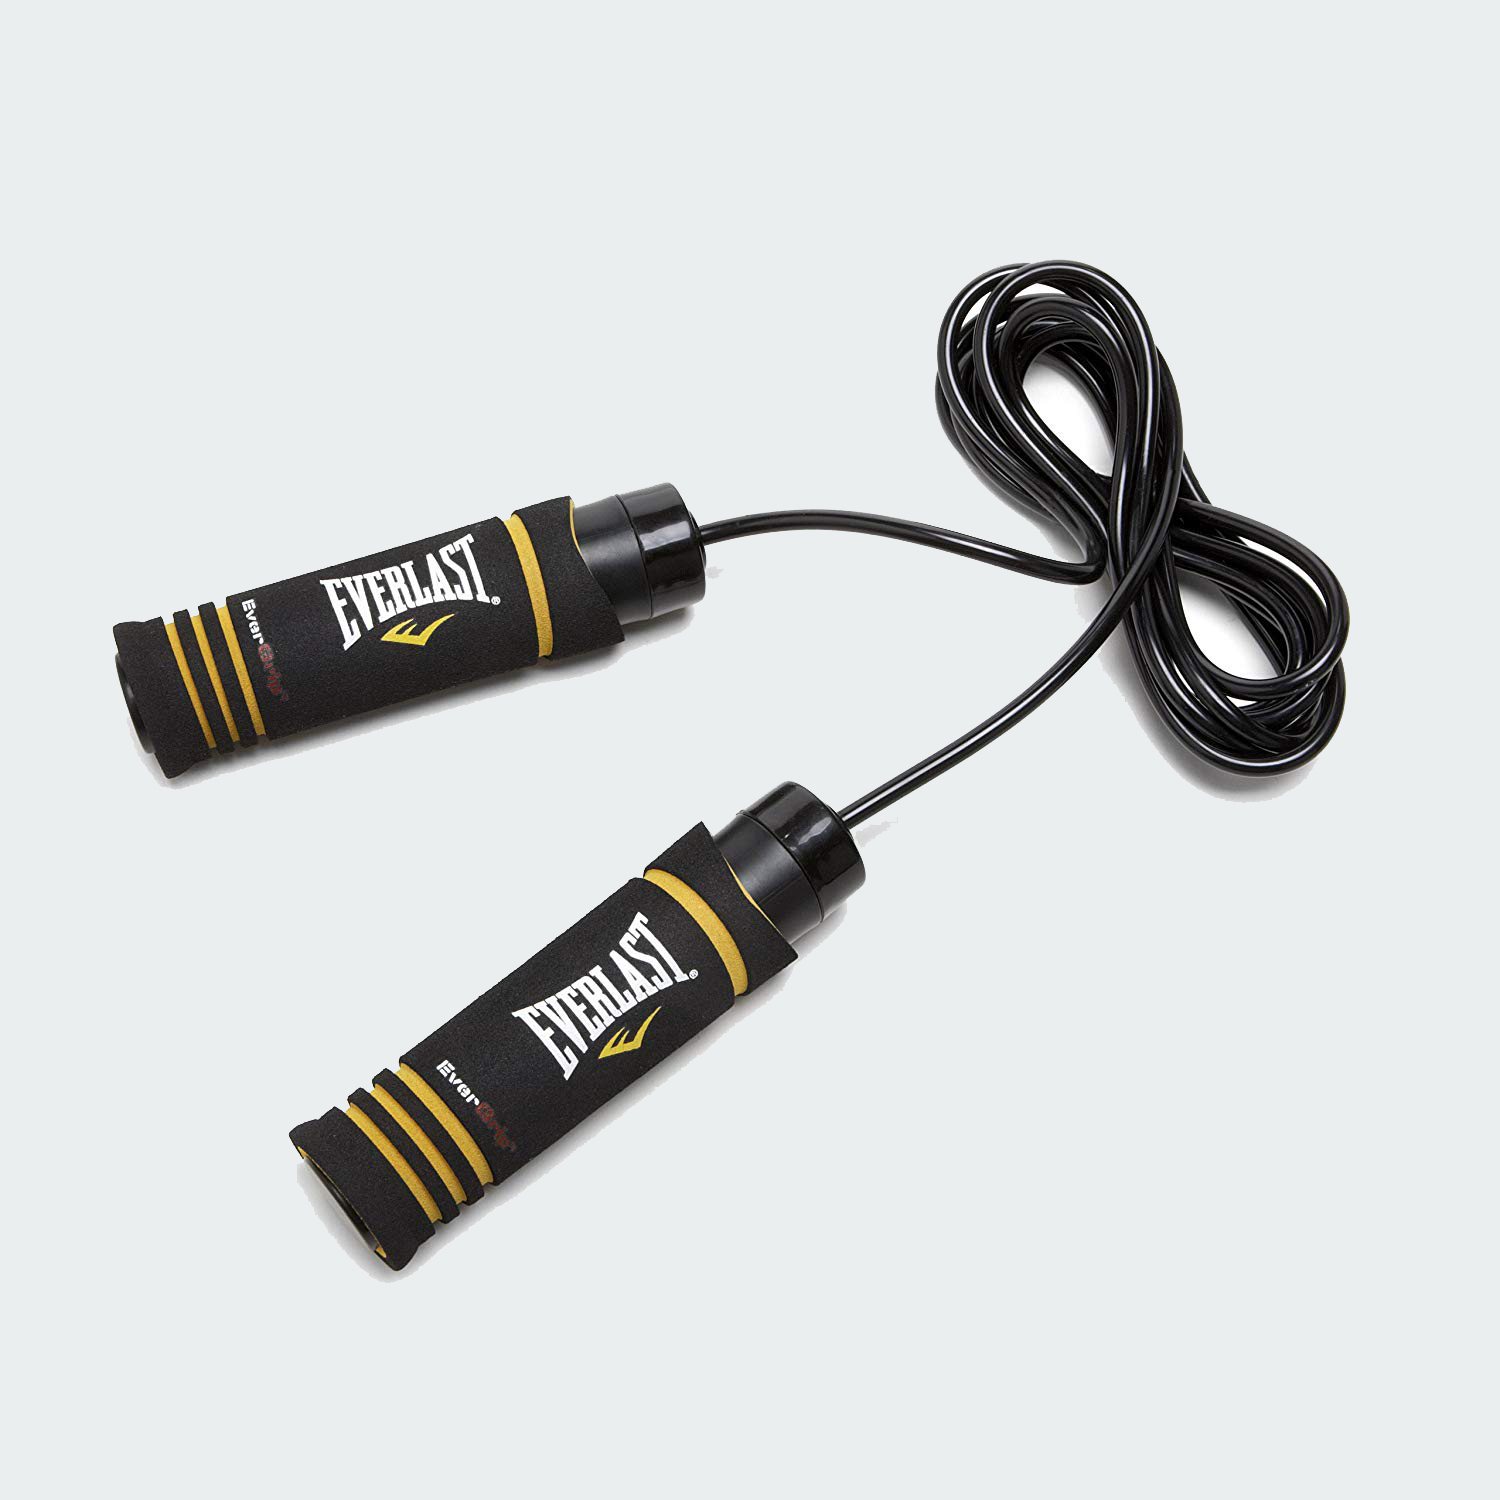 Evergrip Weighted Jumprope Everlast The Fully Optimized Day